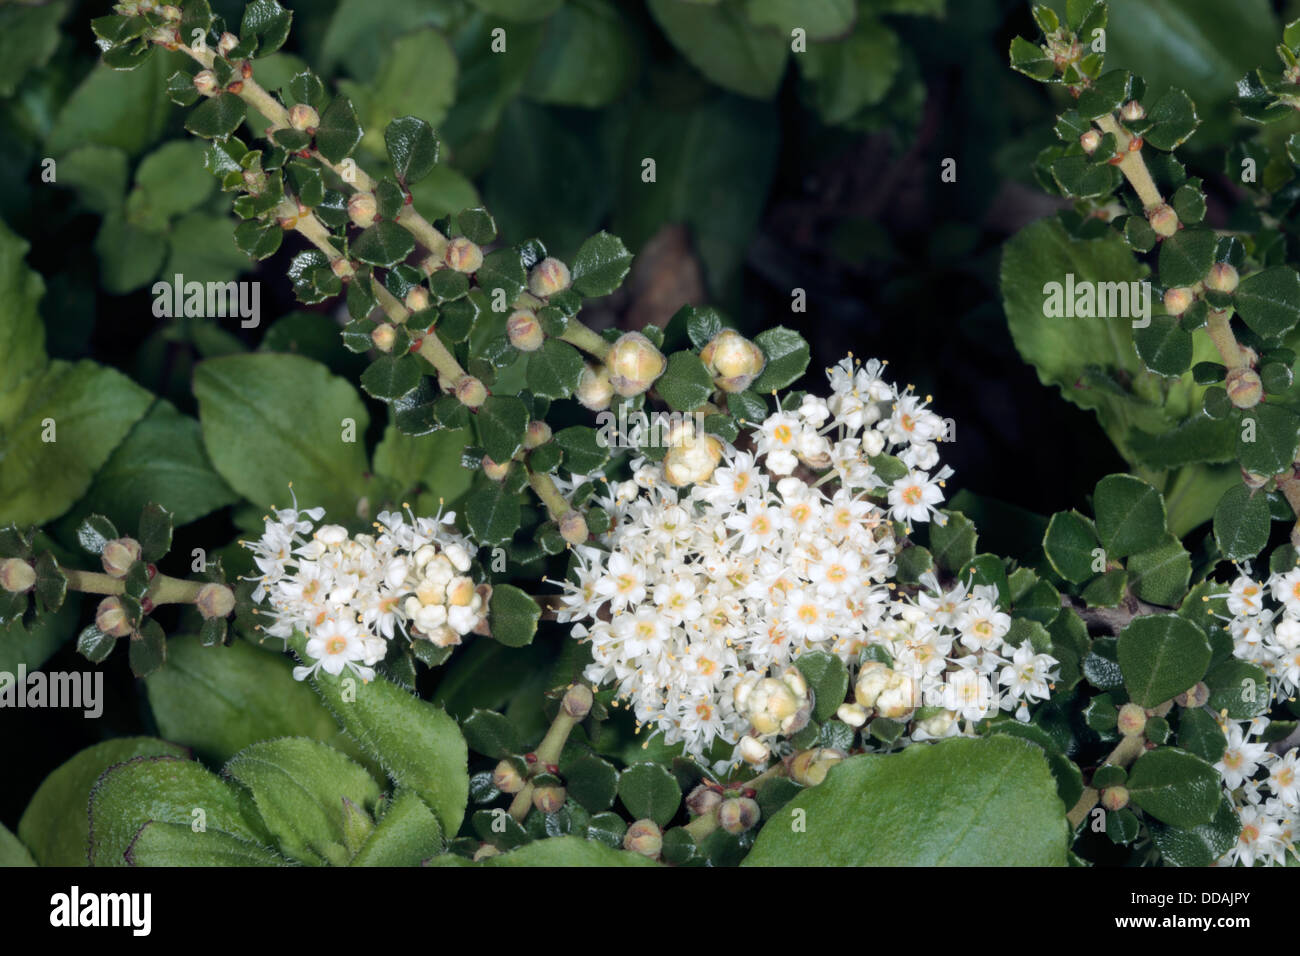 Close-up of Point Reyes Ceanothuis/ Holly ceanothus/Glory Bush/ Glory Mat flowers - Ceanothus gloriosus- Family Rhamnaceae Stock Photo